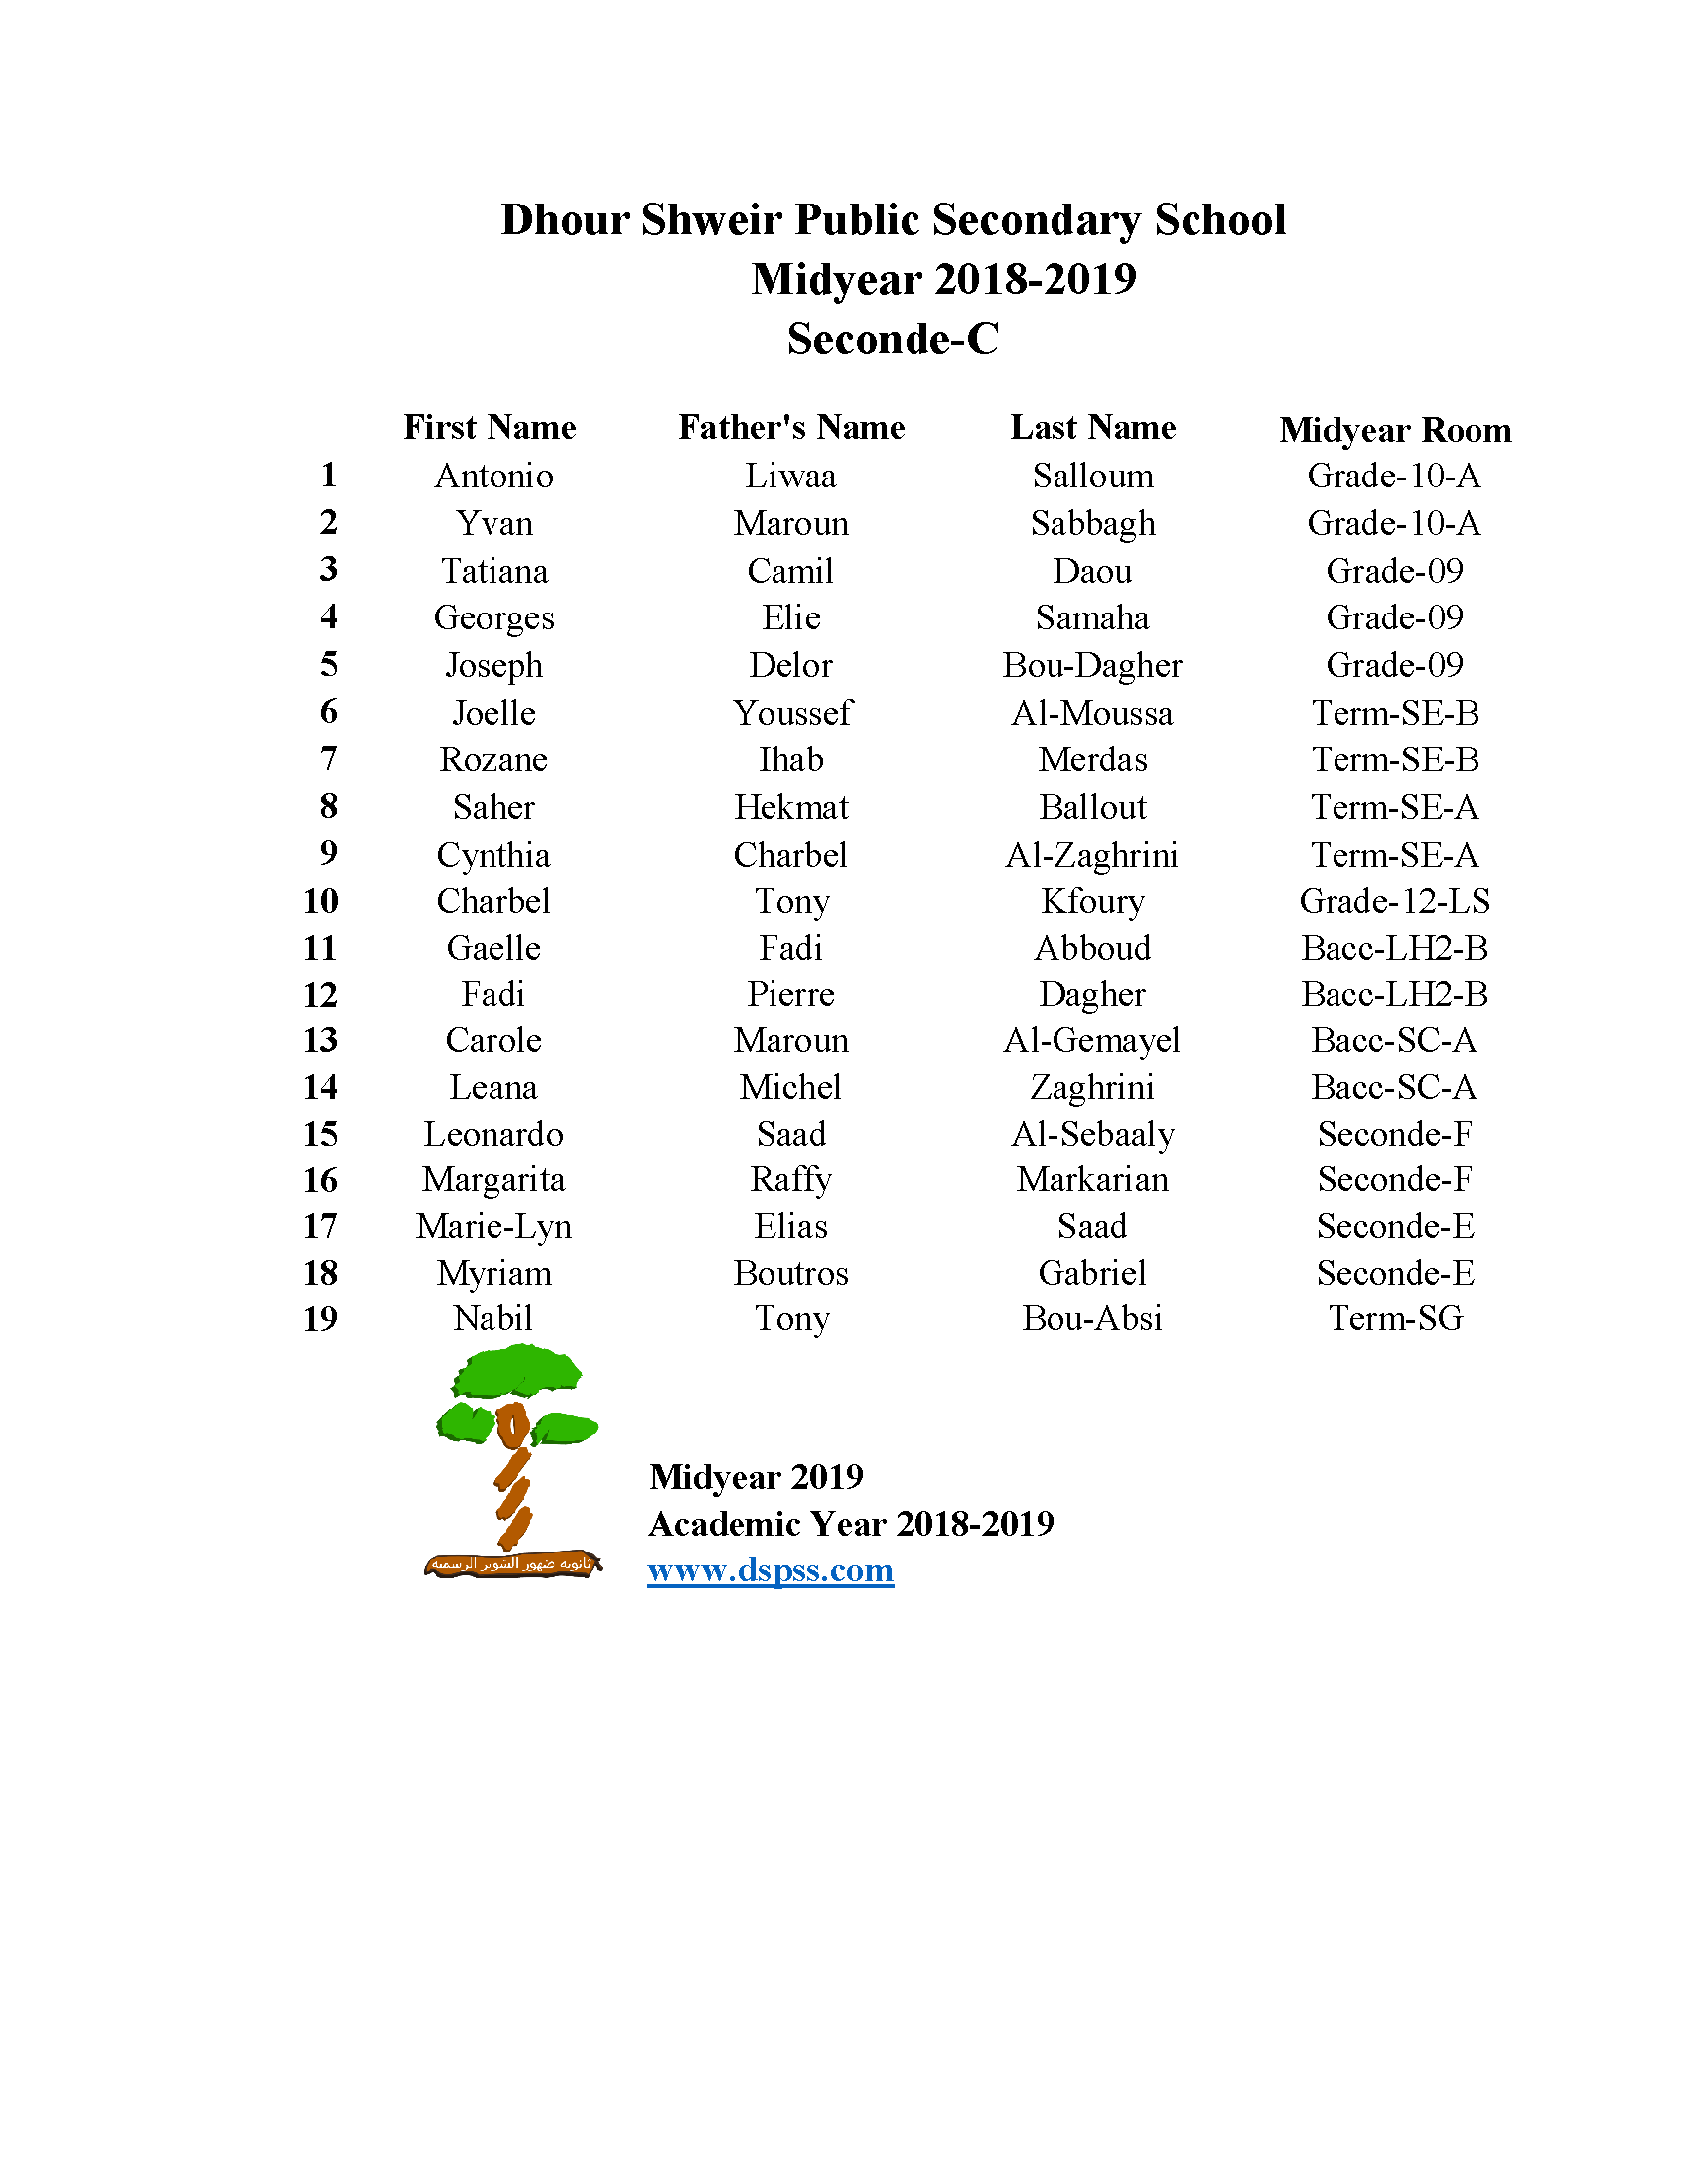 MIDYEAR 2019 SEATS_SECONDE-C.png